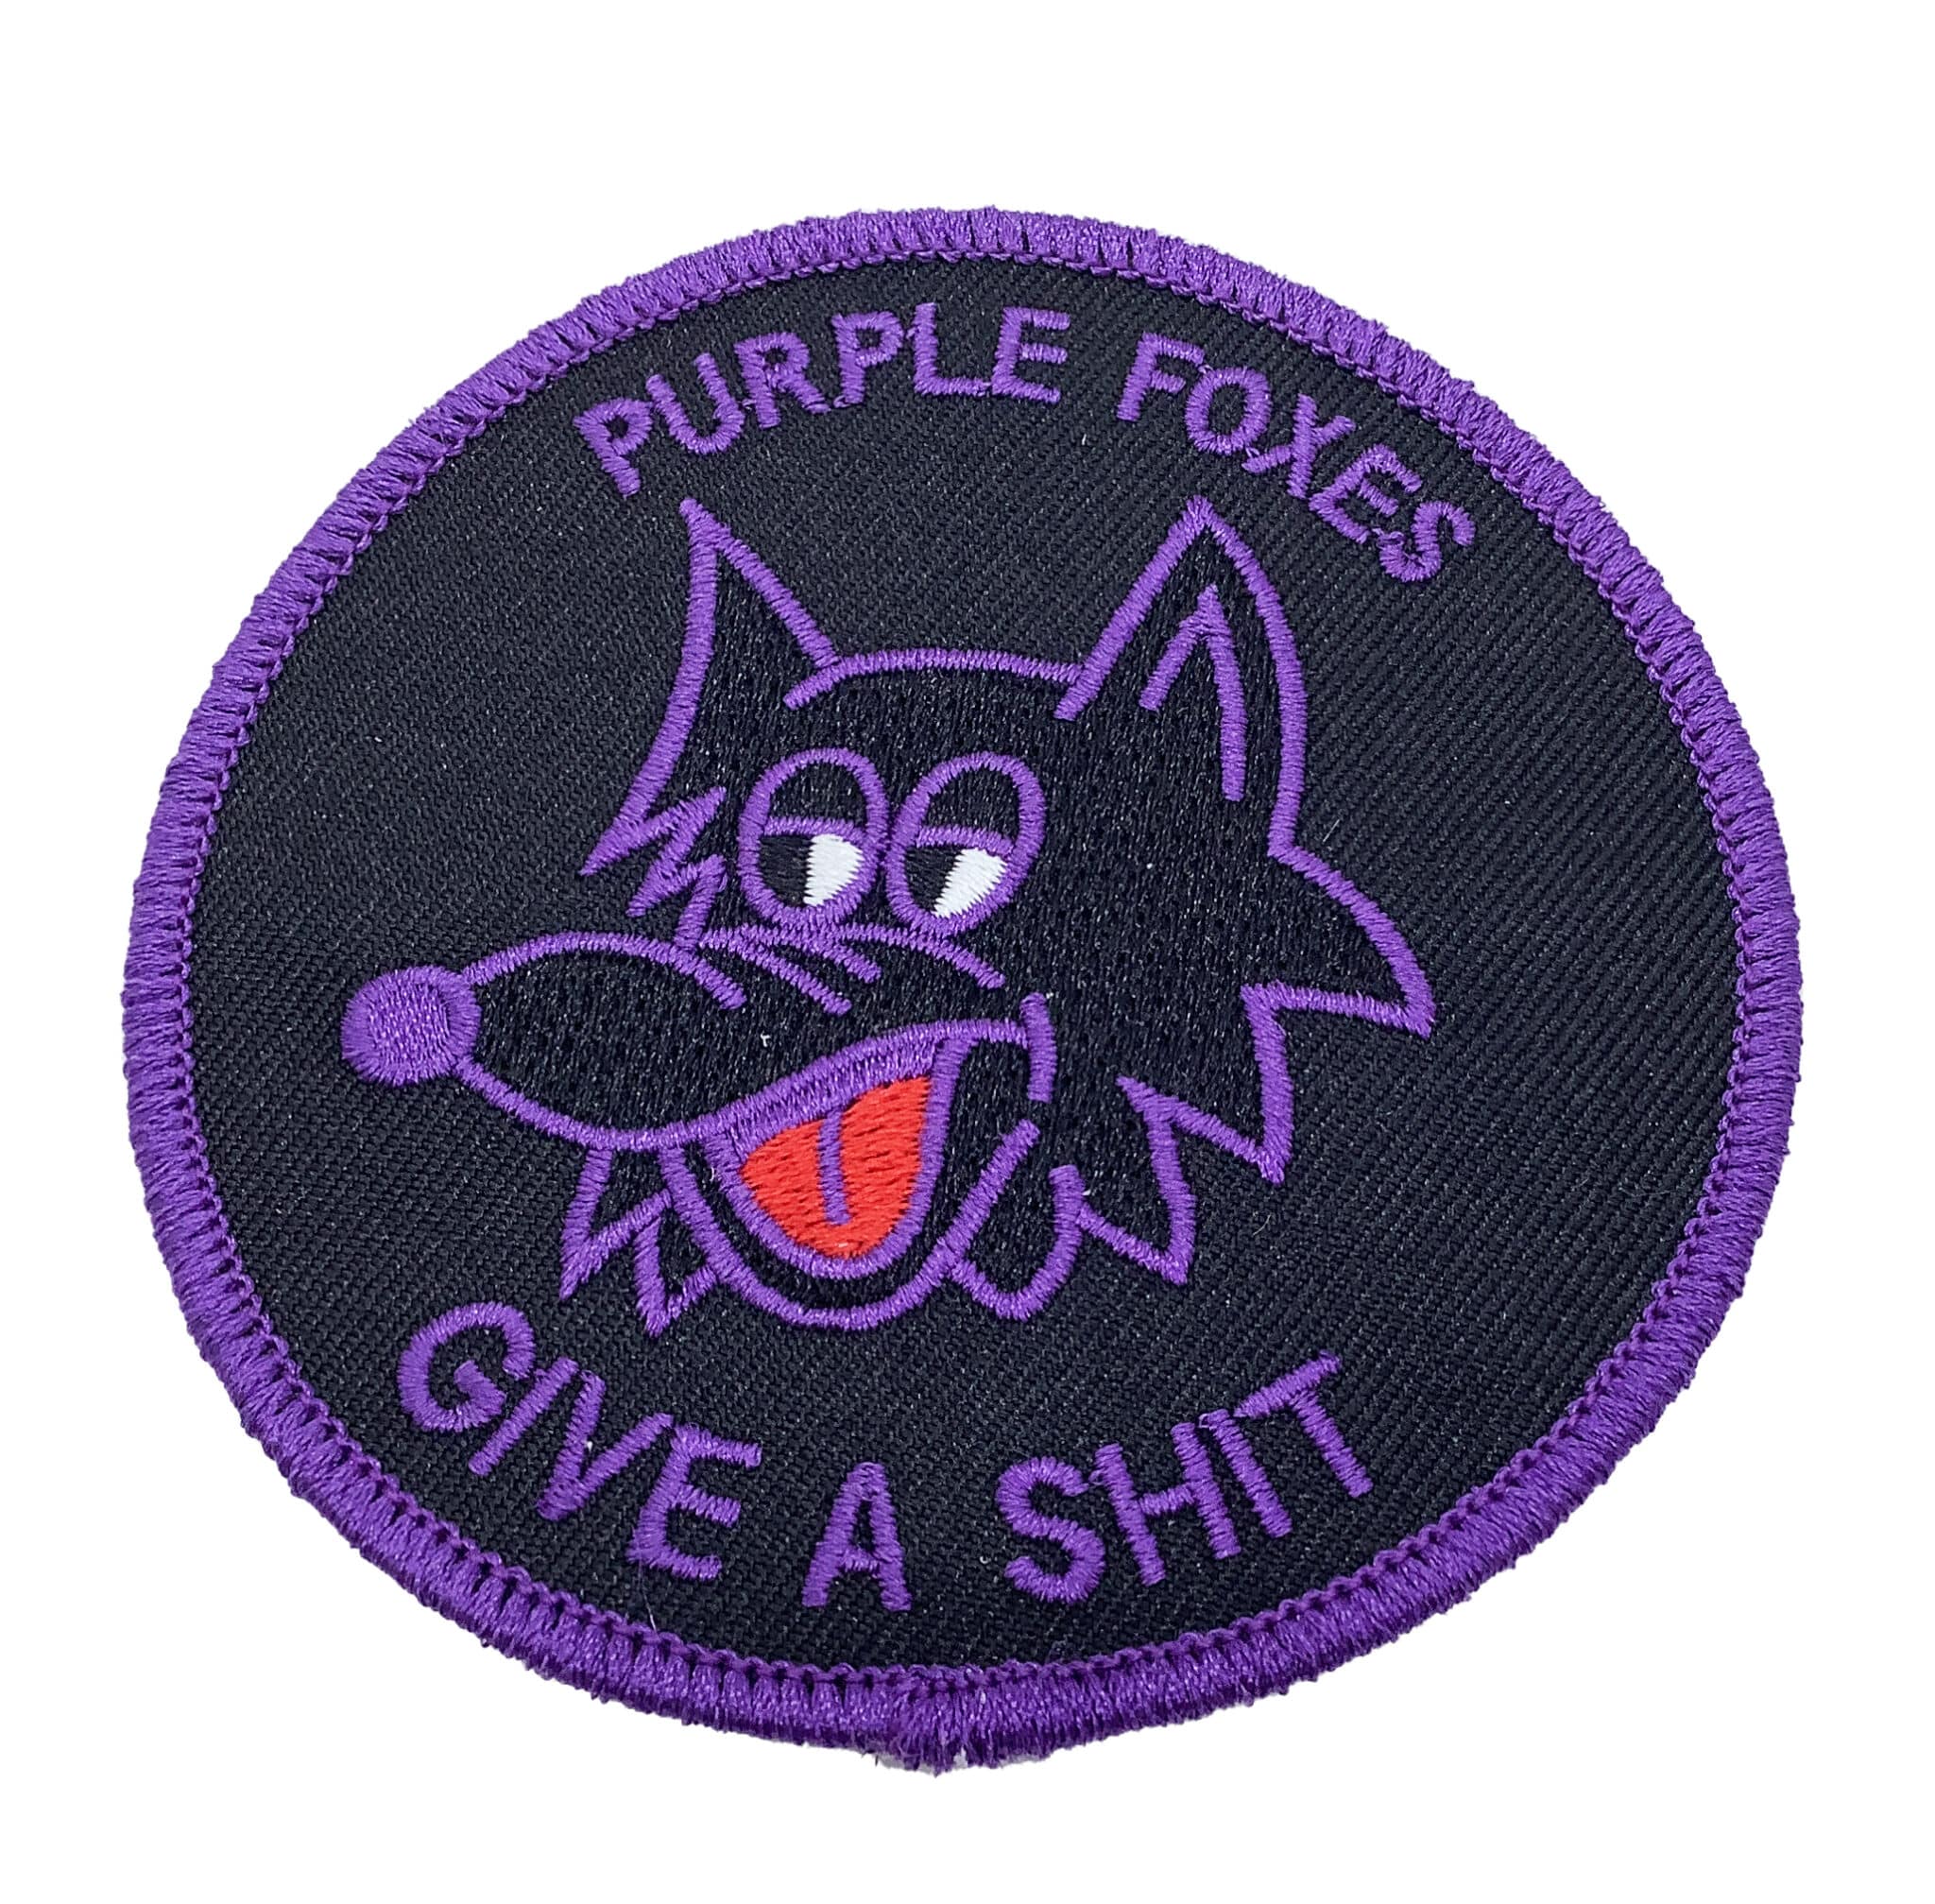 VMM-364 Purple Foxes (Black) Squadron Patch – With Hook and Loop